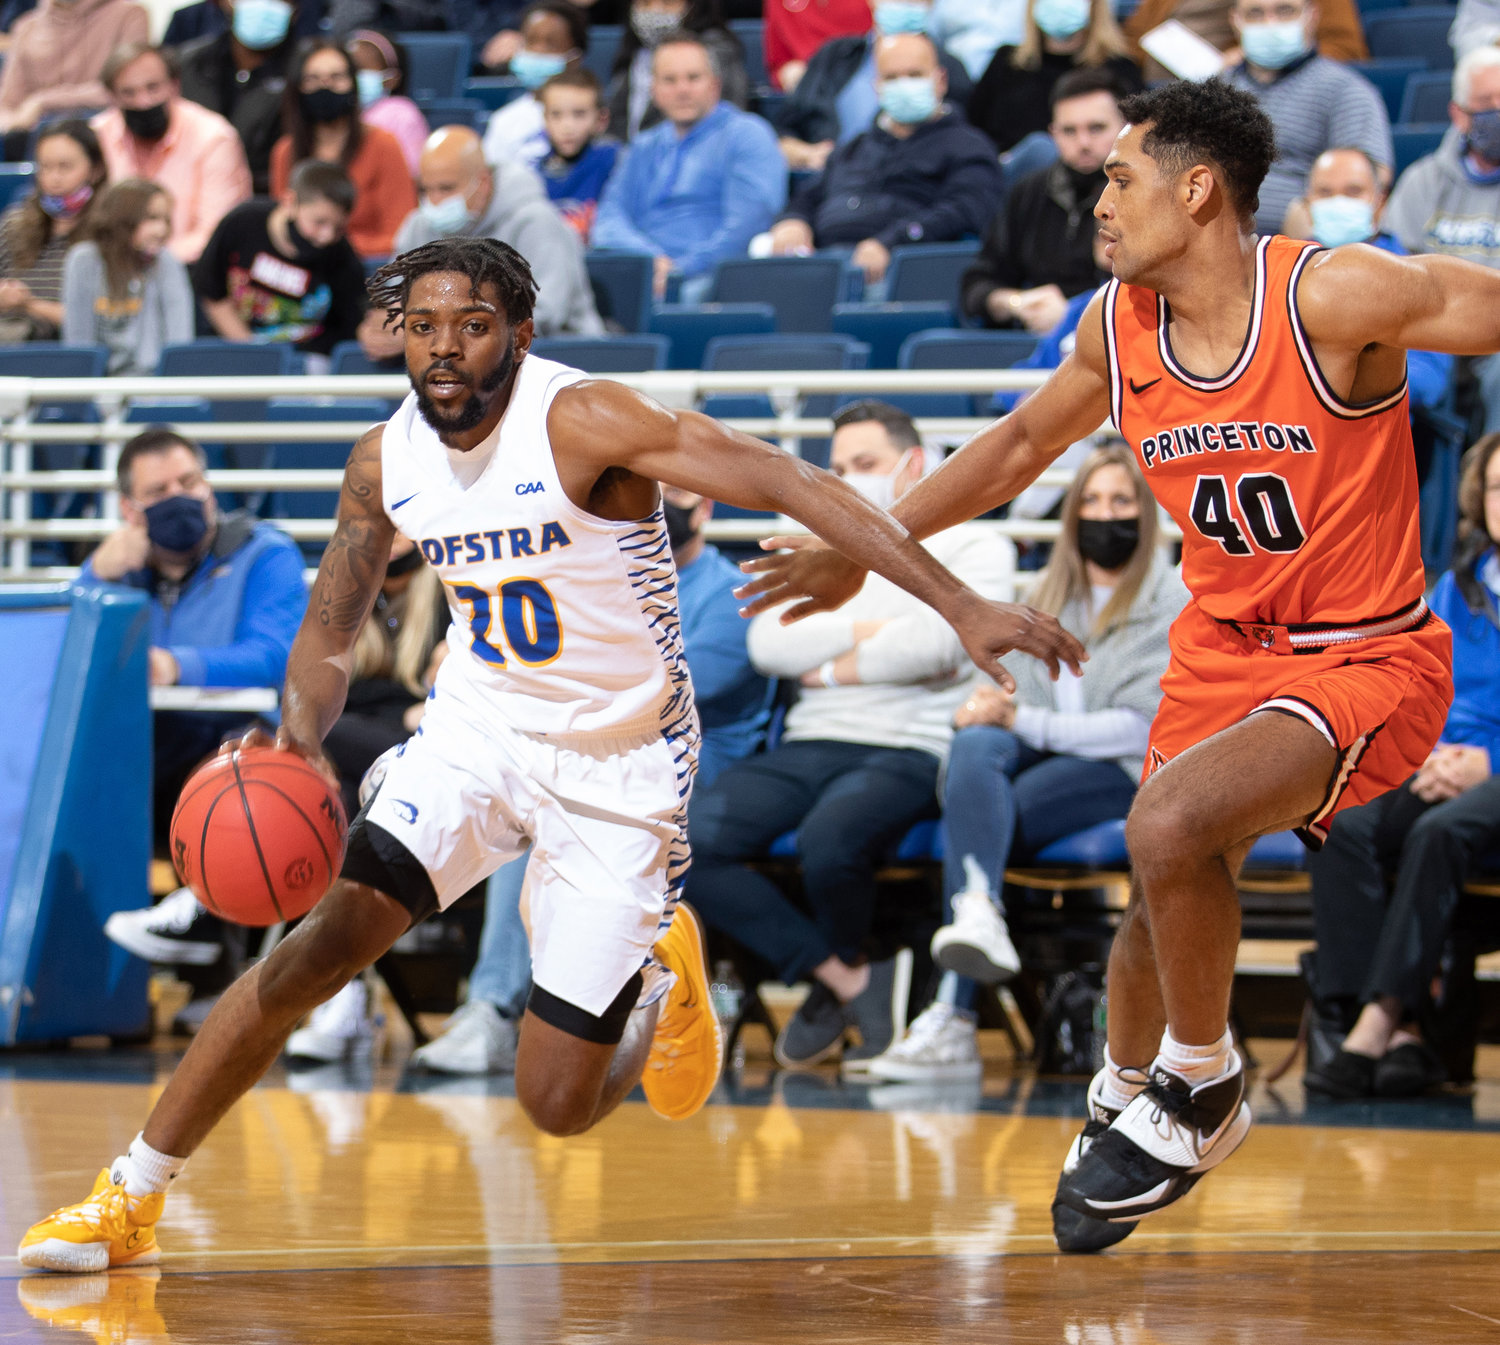 Graduate student Jalen Ray, left, entered the season ranked 17th on Hofstra's all-time scoring list with 1,334 career points.